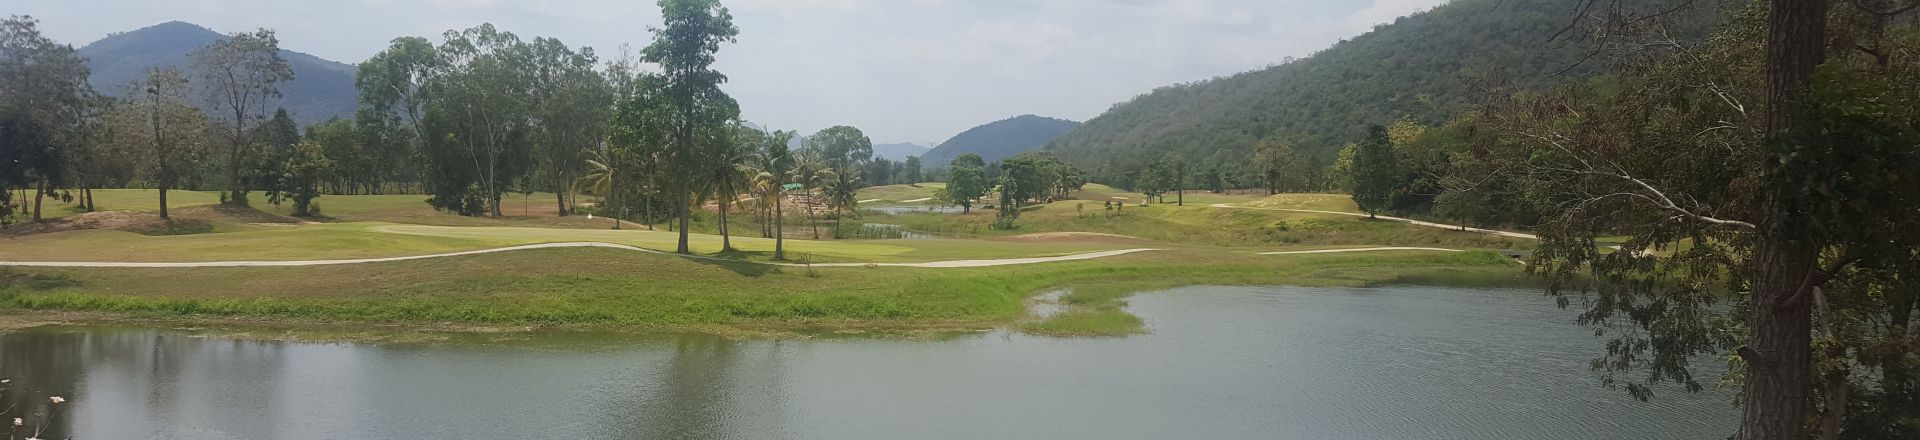 Play golf in Thailand at Majestic Creek Country Club